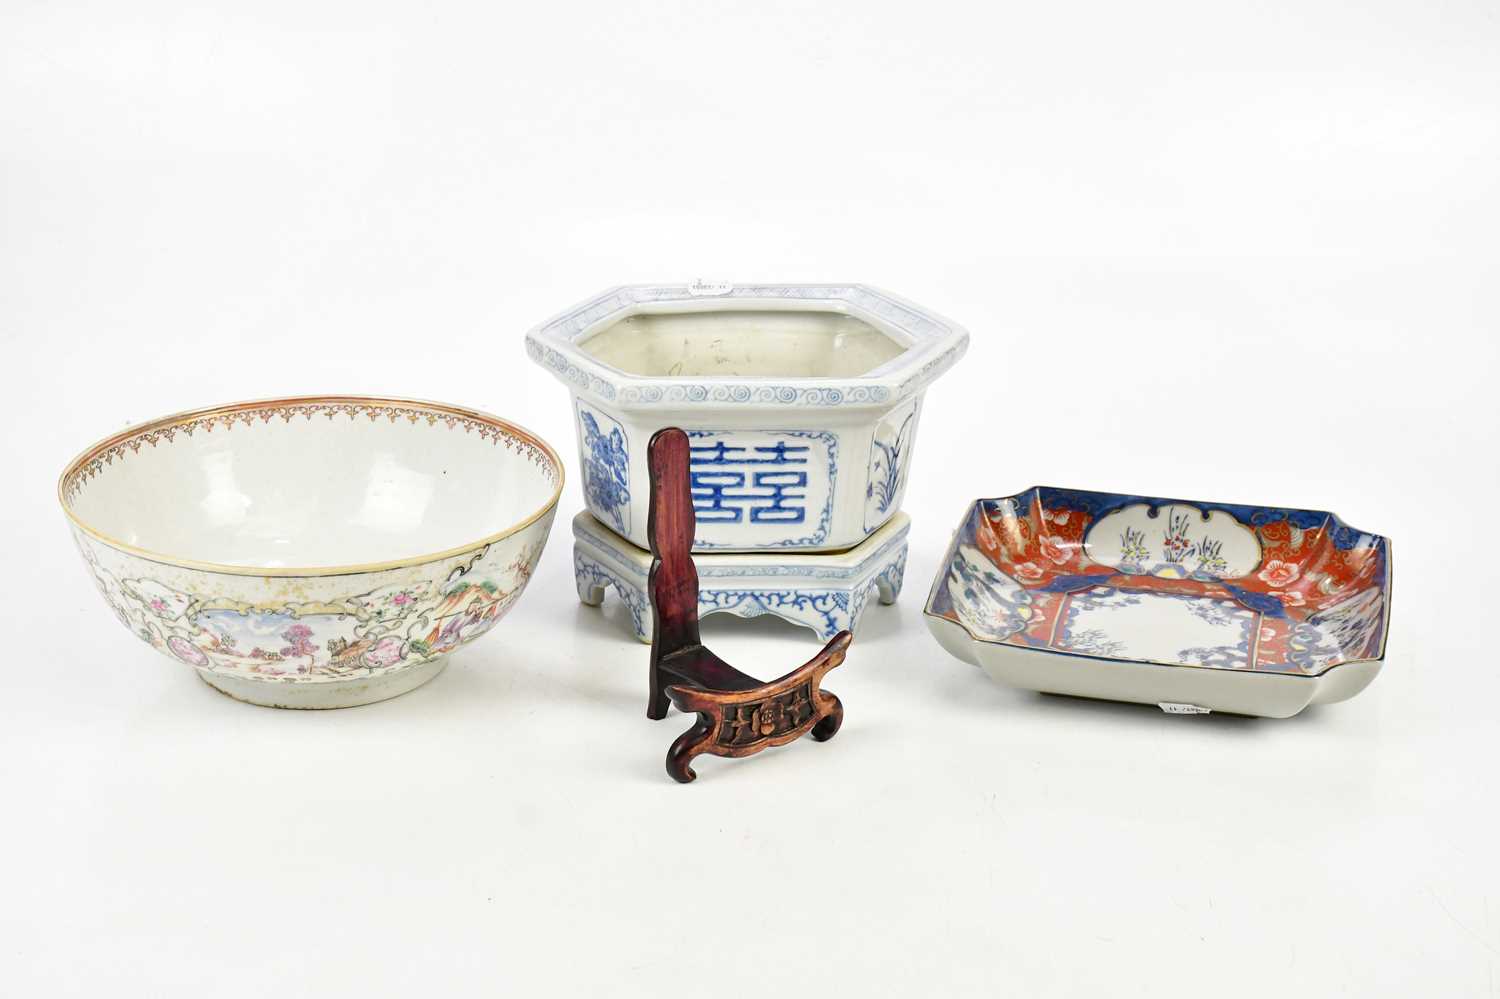 An 18th century Chinese Famille Rose Exportware footed bowl, decorated with elders and figures in